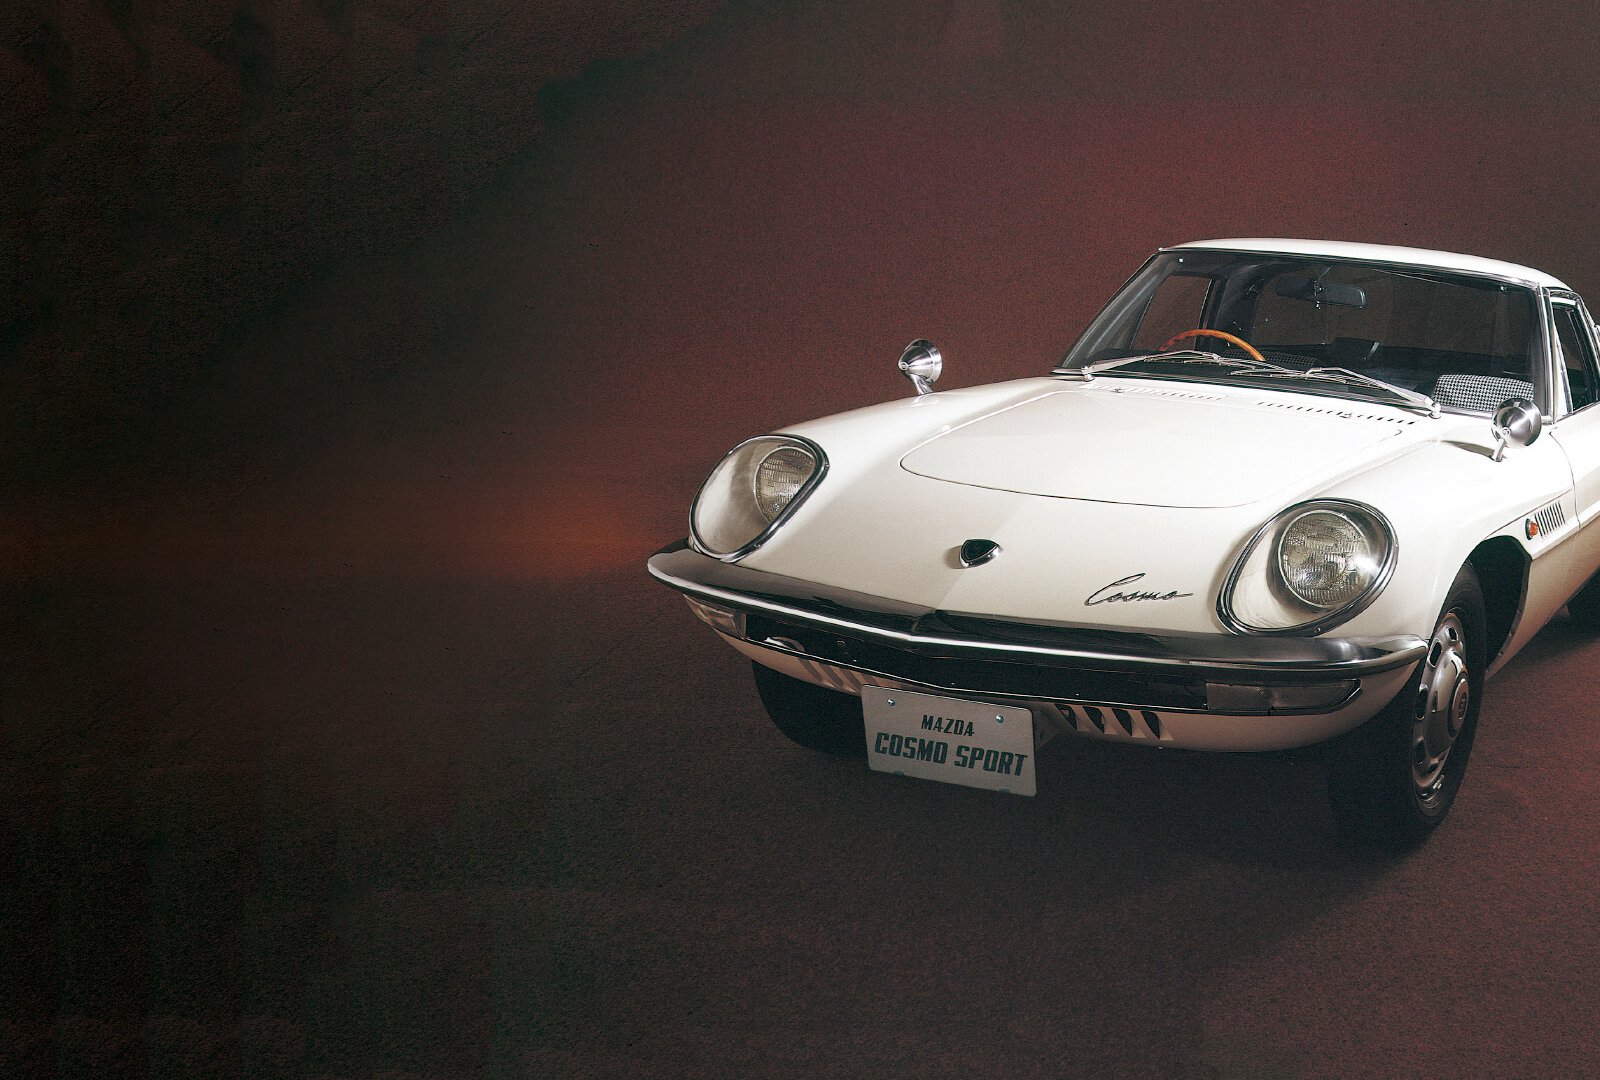 White Mazda Cosmo Sport against red background in three-quarter view from in front of passenger-side headlight.